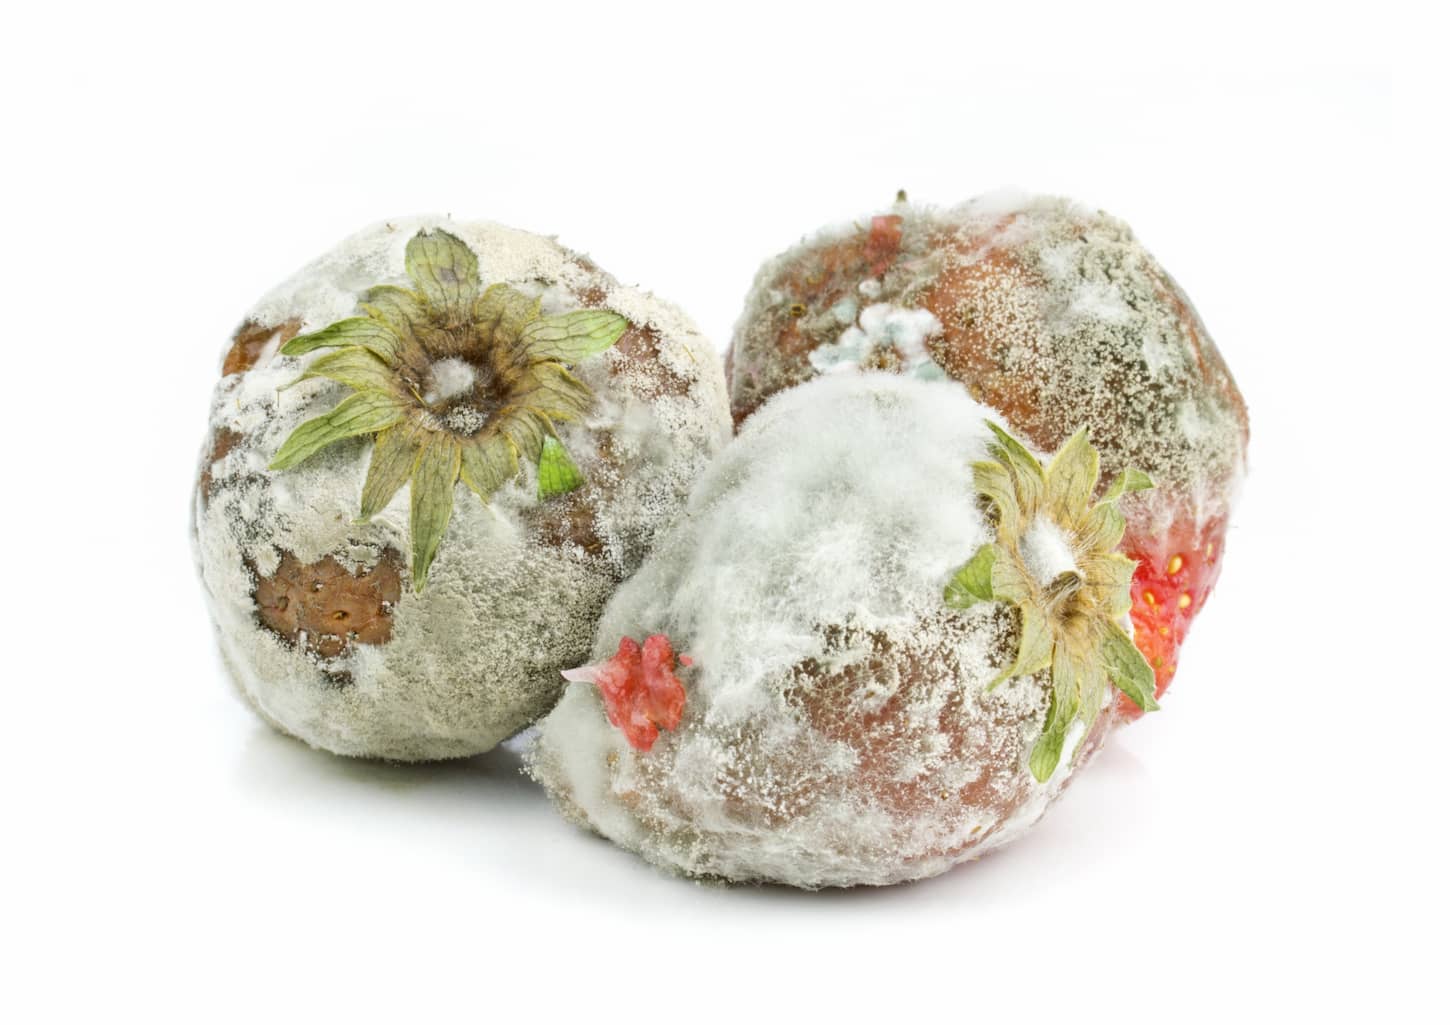 An image of three rotten mouldy strawberries on a white background.